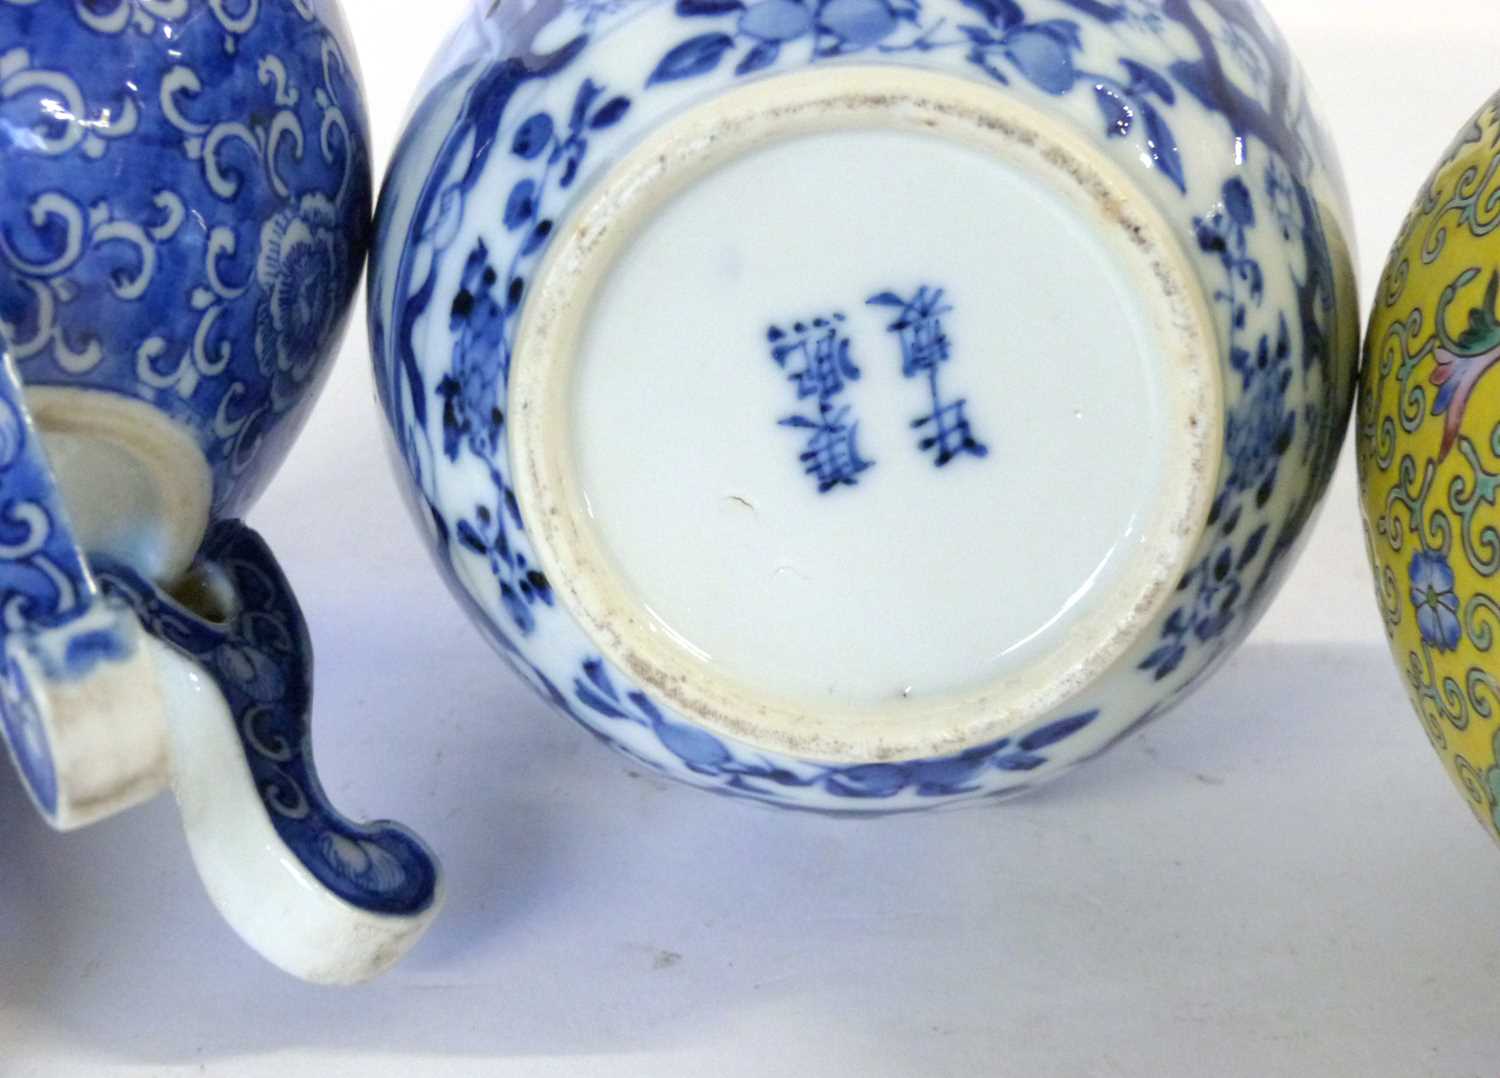 Imperial yellow Chinese porcelain jar, 19th Century Chinese blue and white vase with character marks - Image 5 of 5